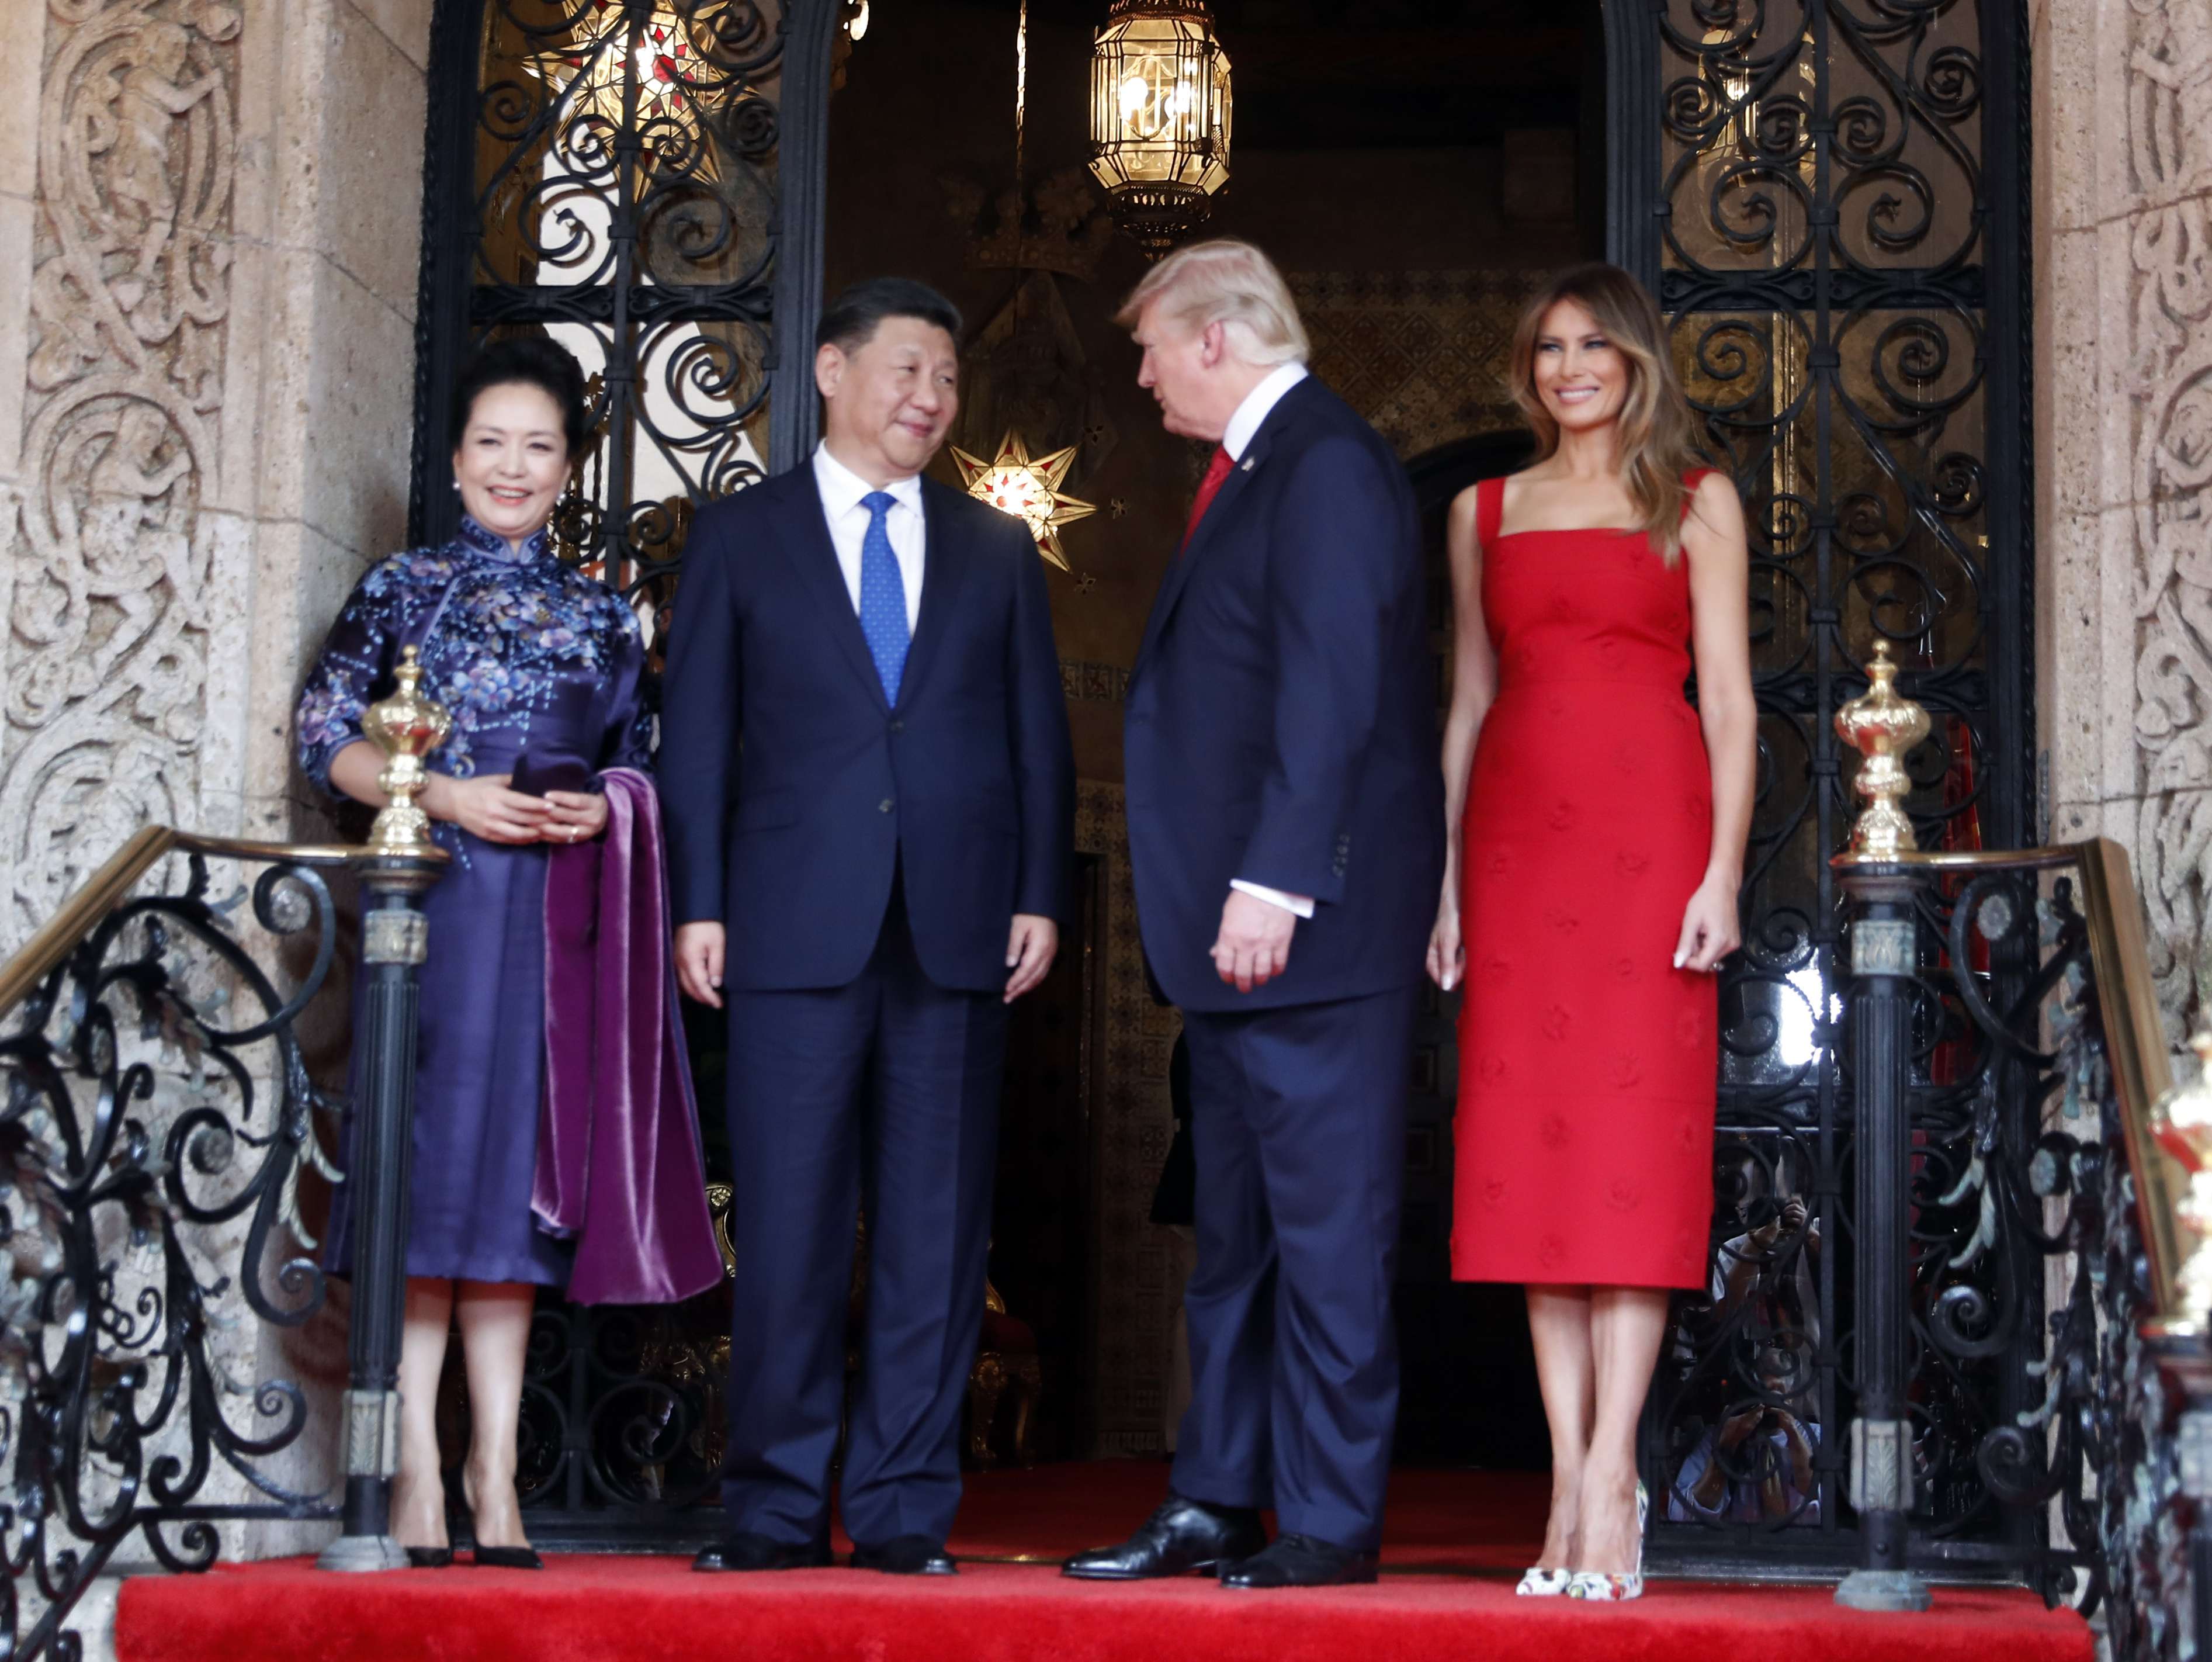 US President Donald Trump and first lady Melania Trump pose with Chinese President Xi Jinping and his wife Peng Liyuan at the Mar-a-Lago estate in West Palm Beach, Florida, on Thursday. Photo: AP